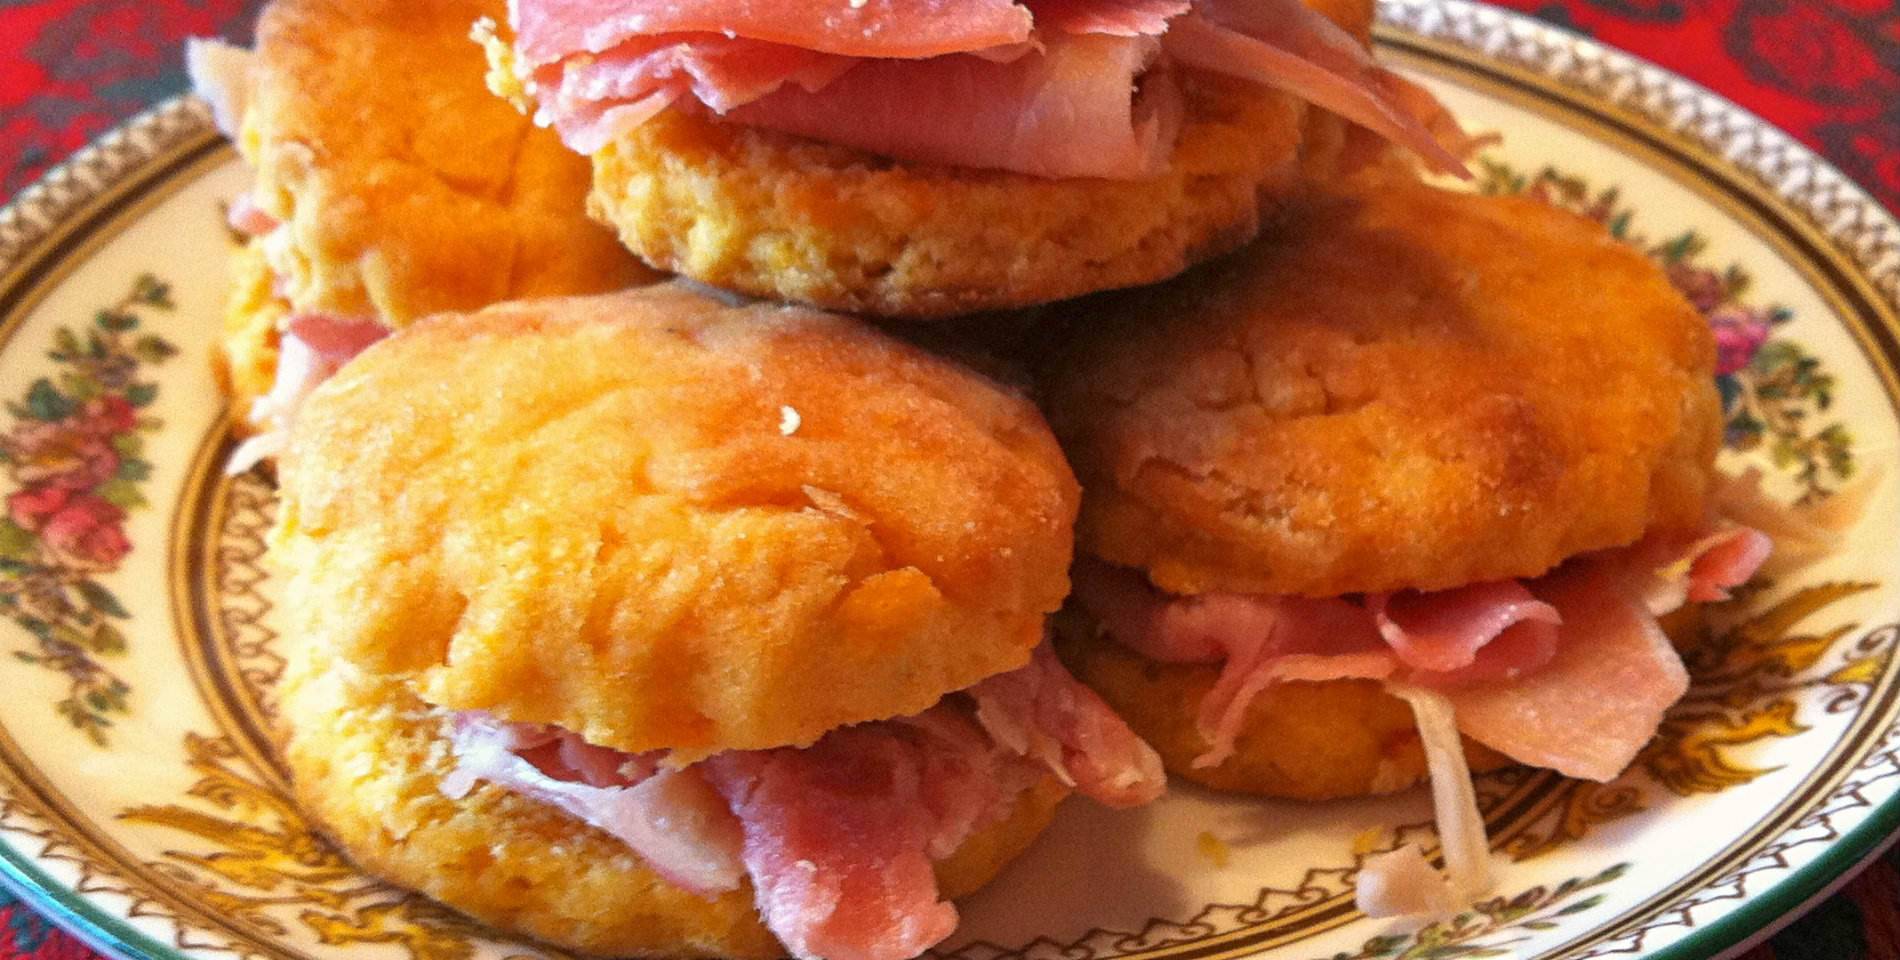 Sweet potato biscuits and Virginia ham on a floral print plant atop a red tablecloth.